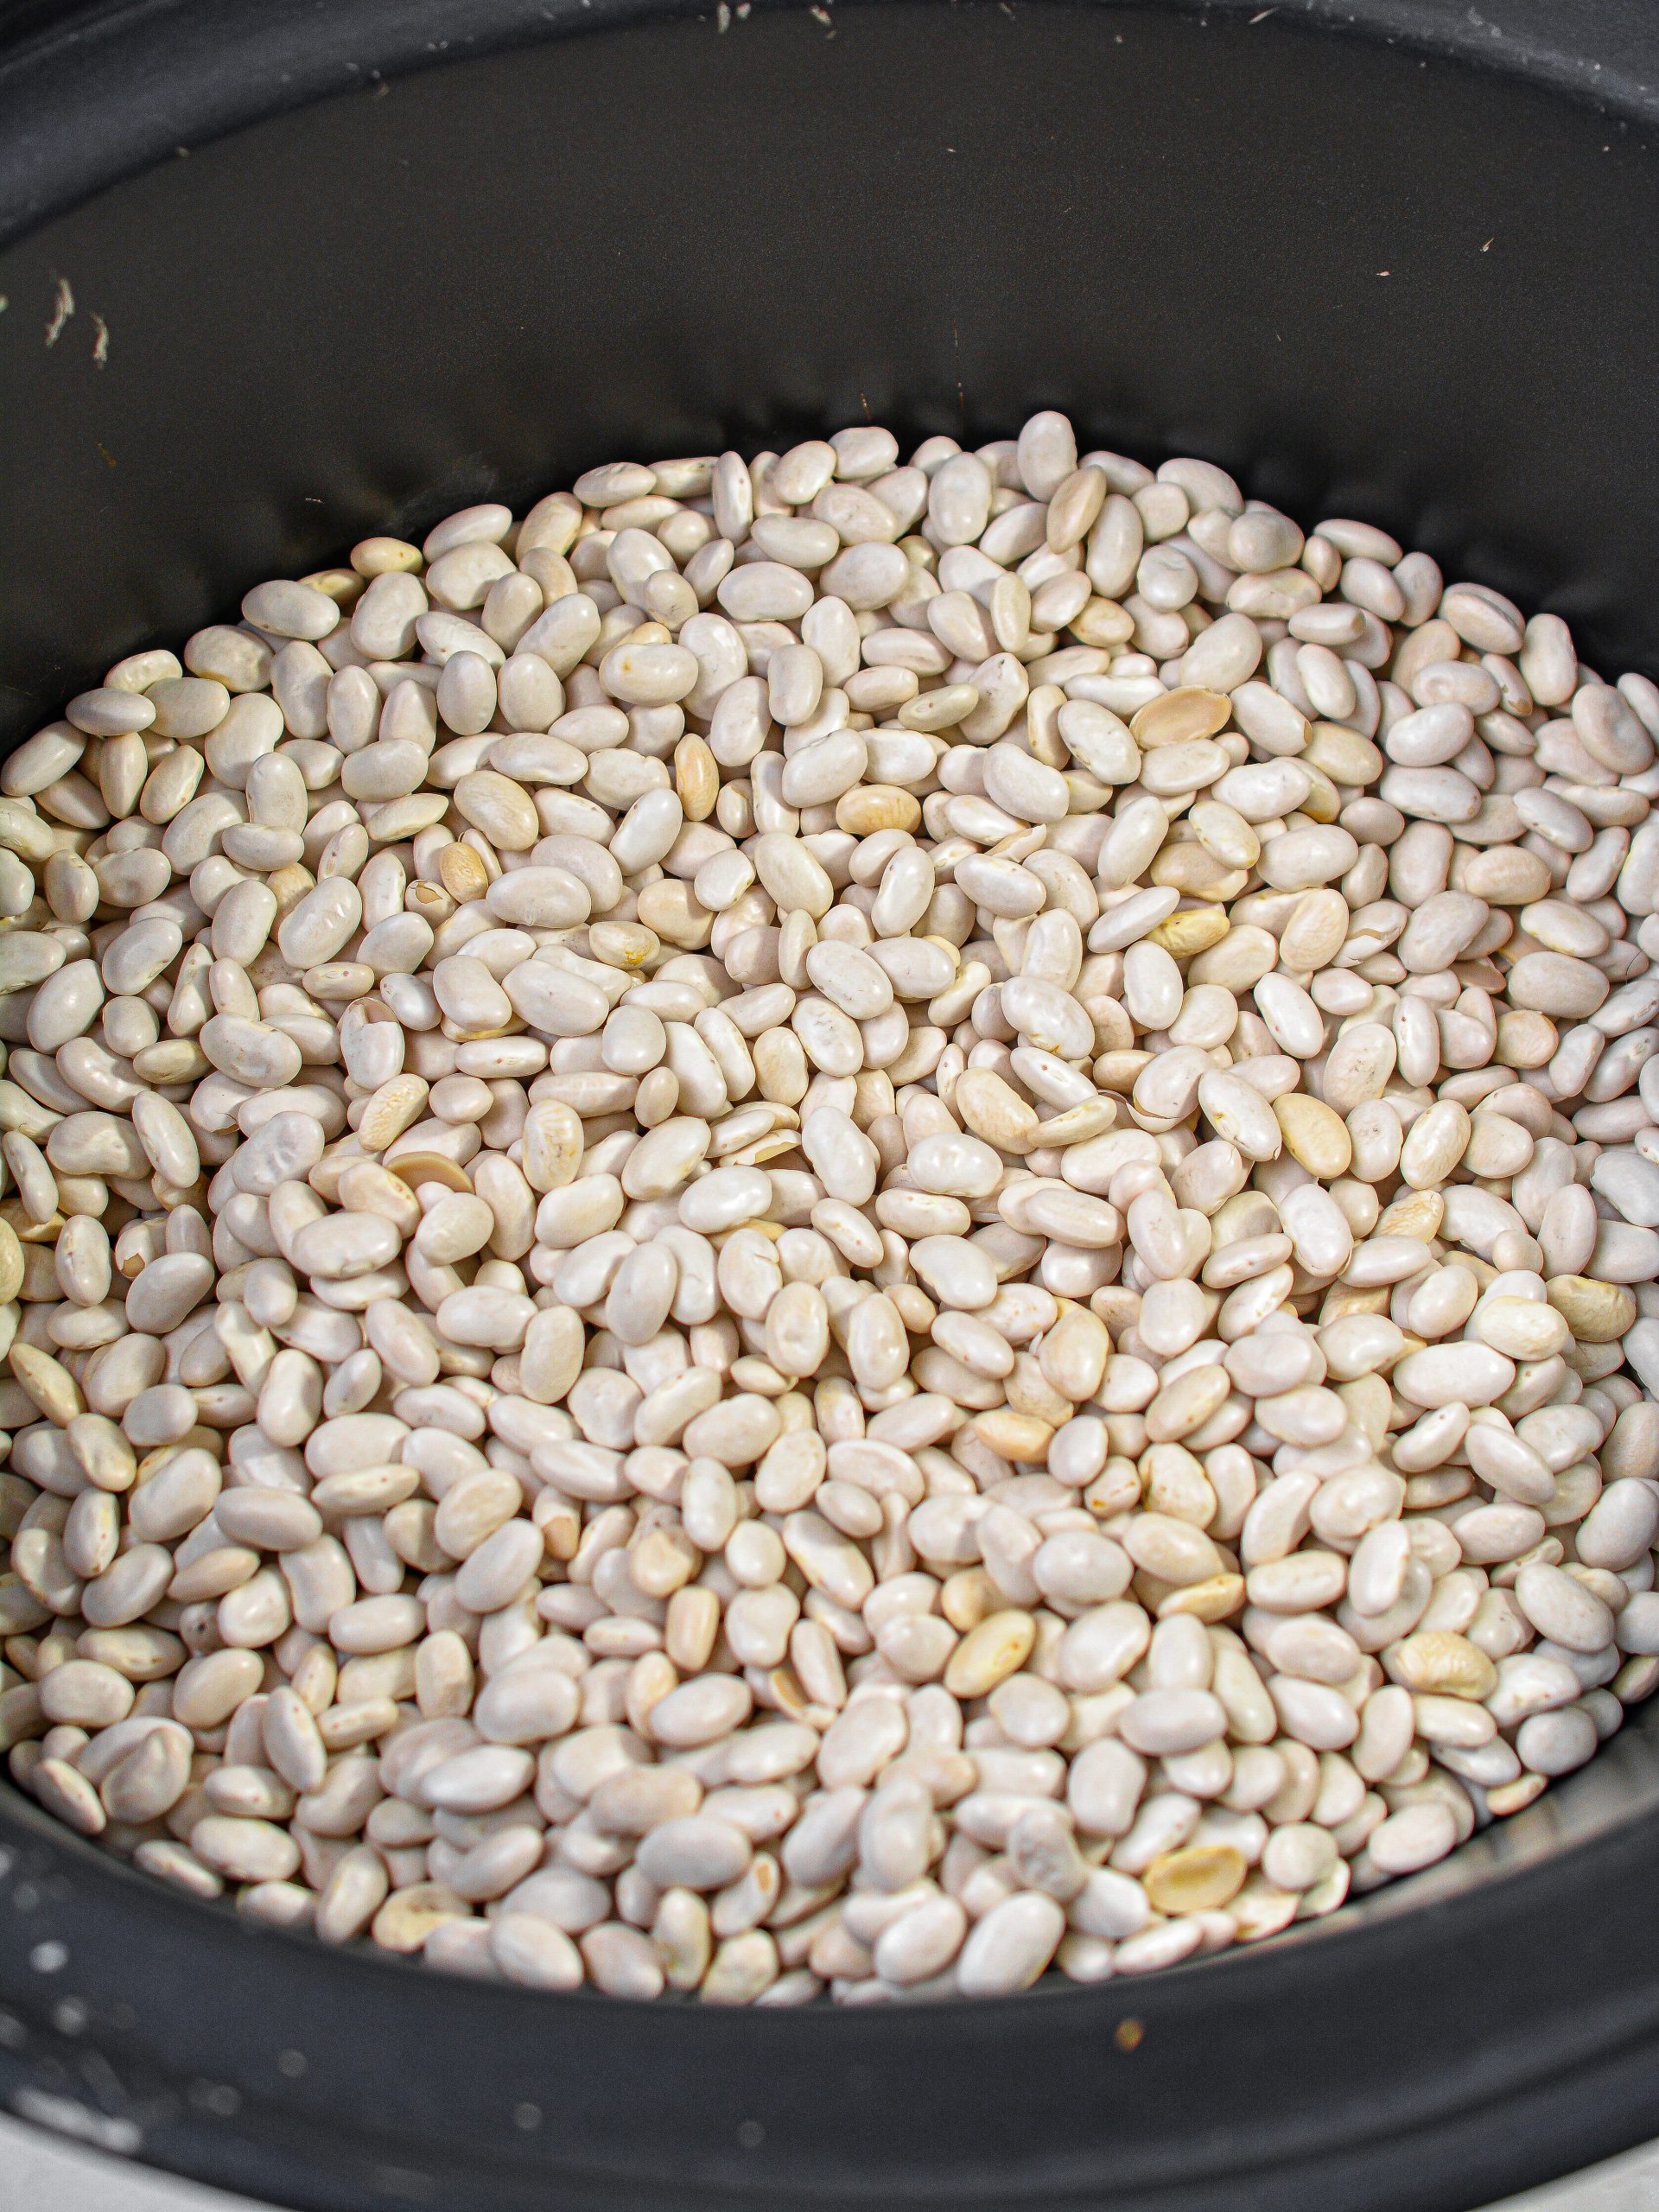 Place 2 lb. dried great northern beans into the crockpot.